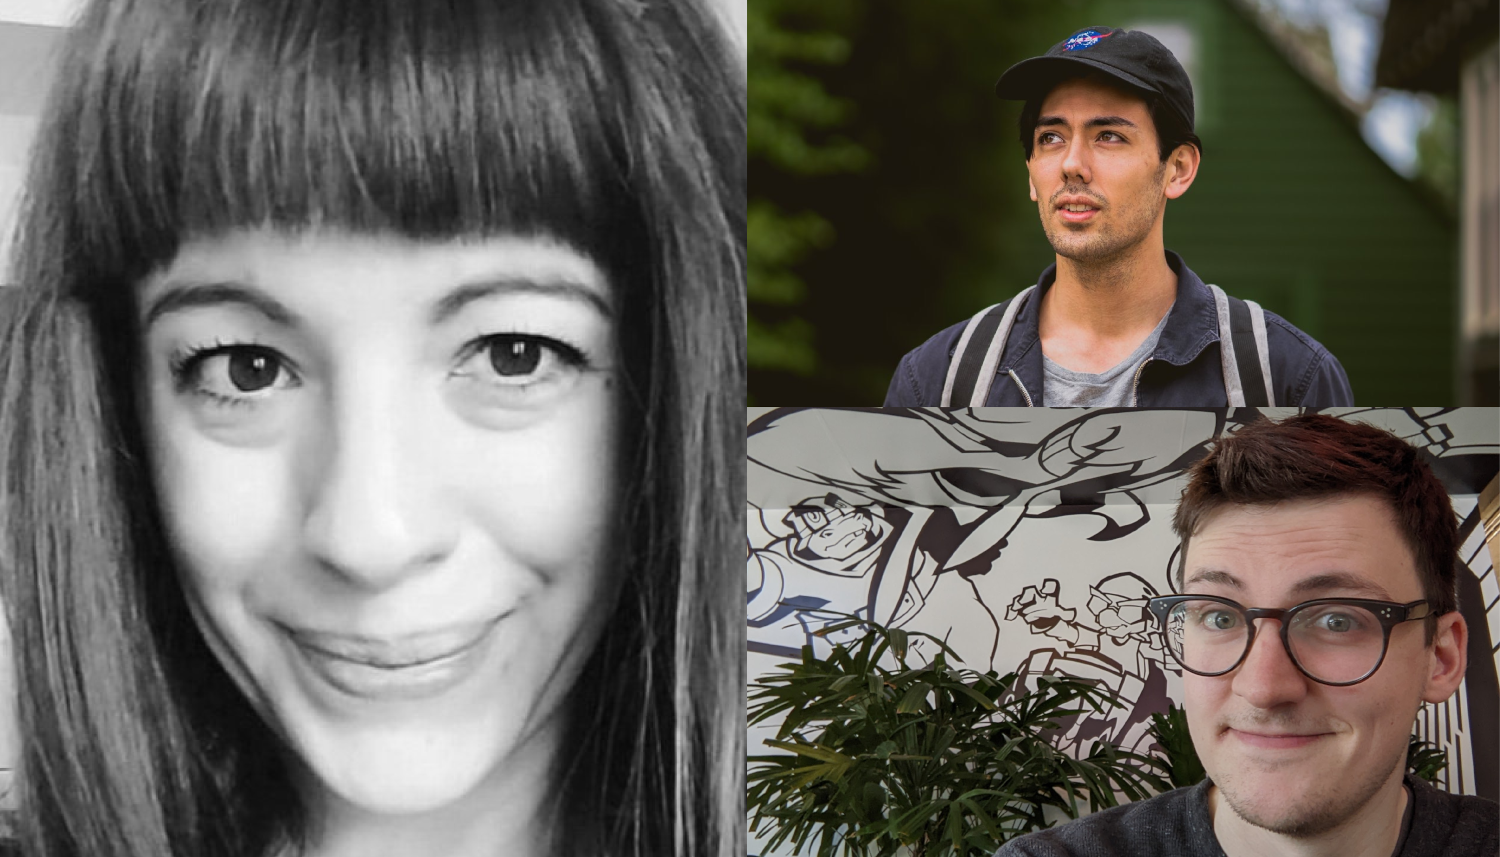 Open World Industry Guests Jessica Ann Moretti, Cameron Asao, and Grey Davenport